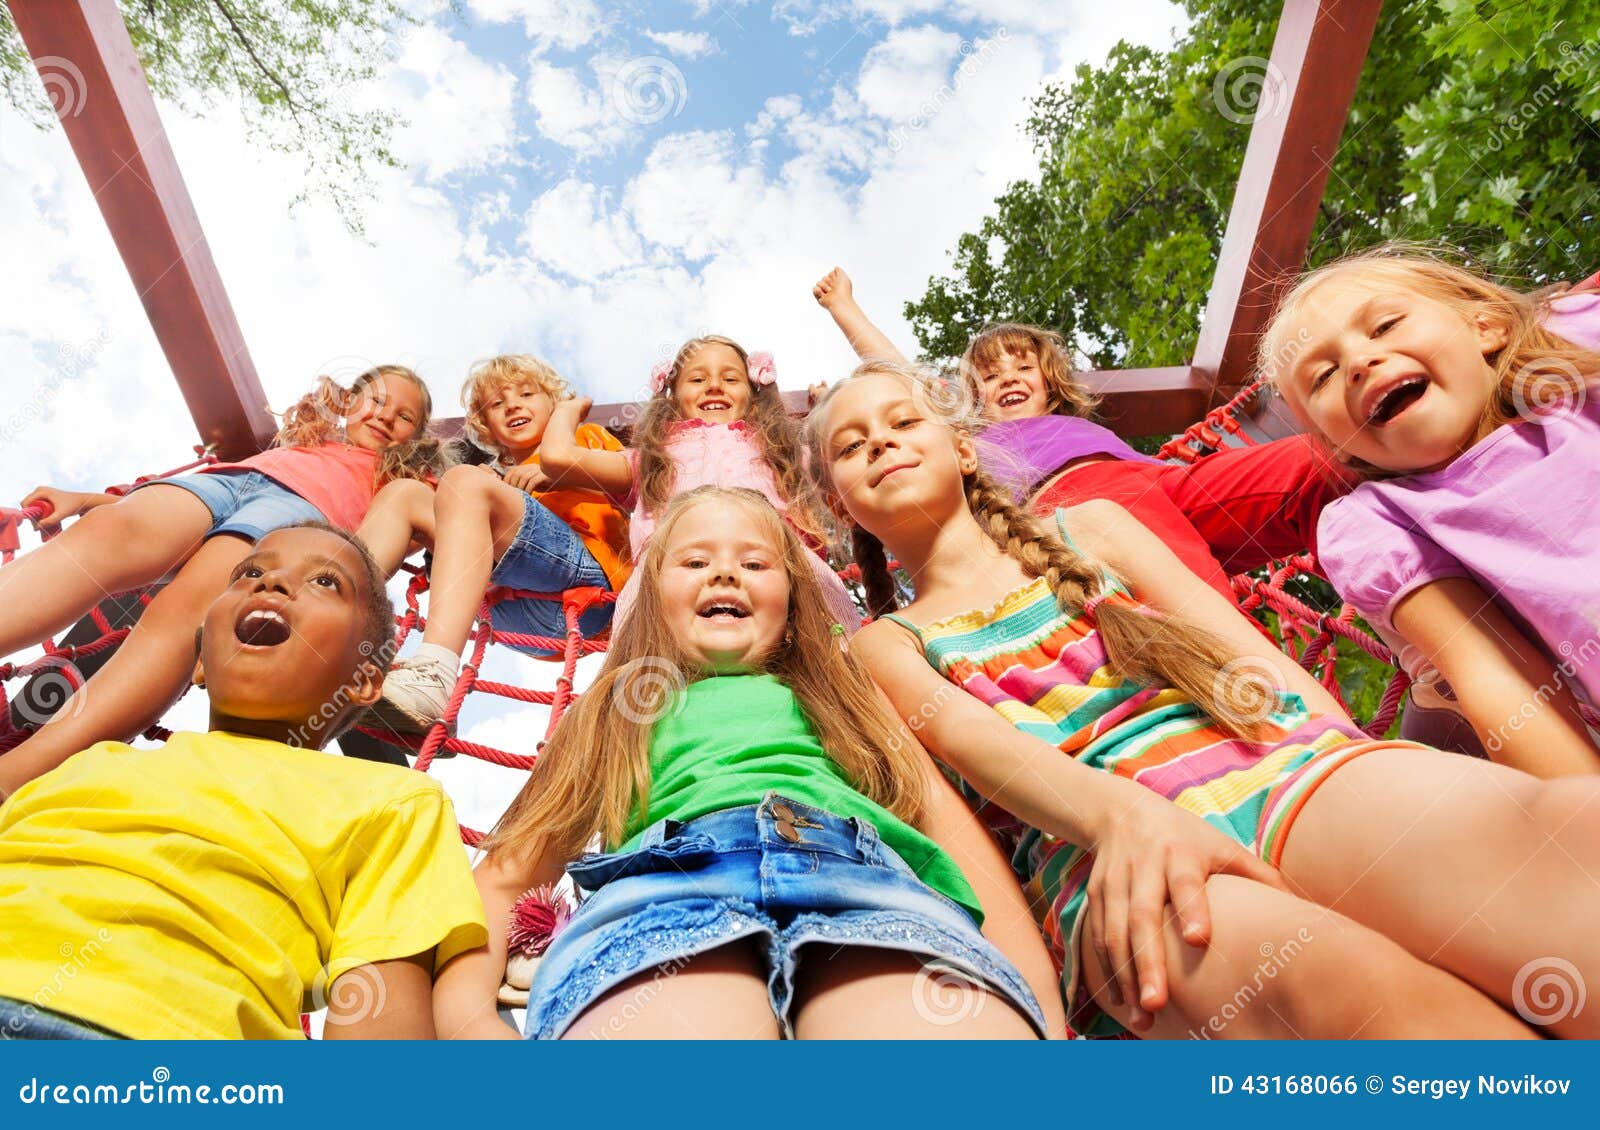 View from Below of Happy Kids on Net Ropes Stock Photo - Image of